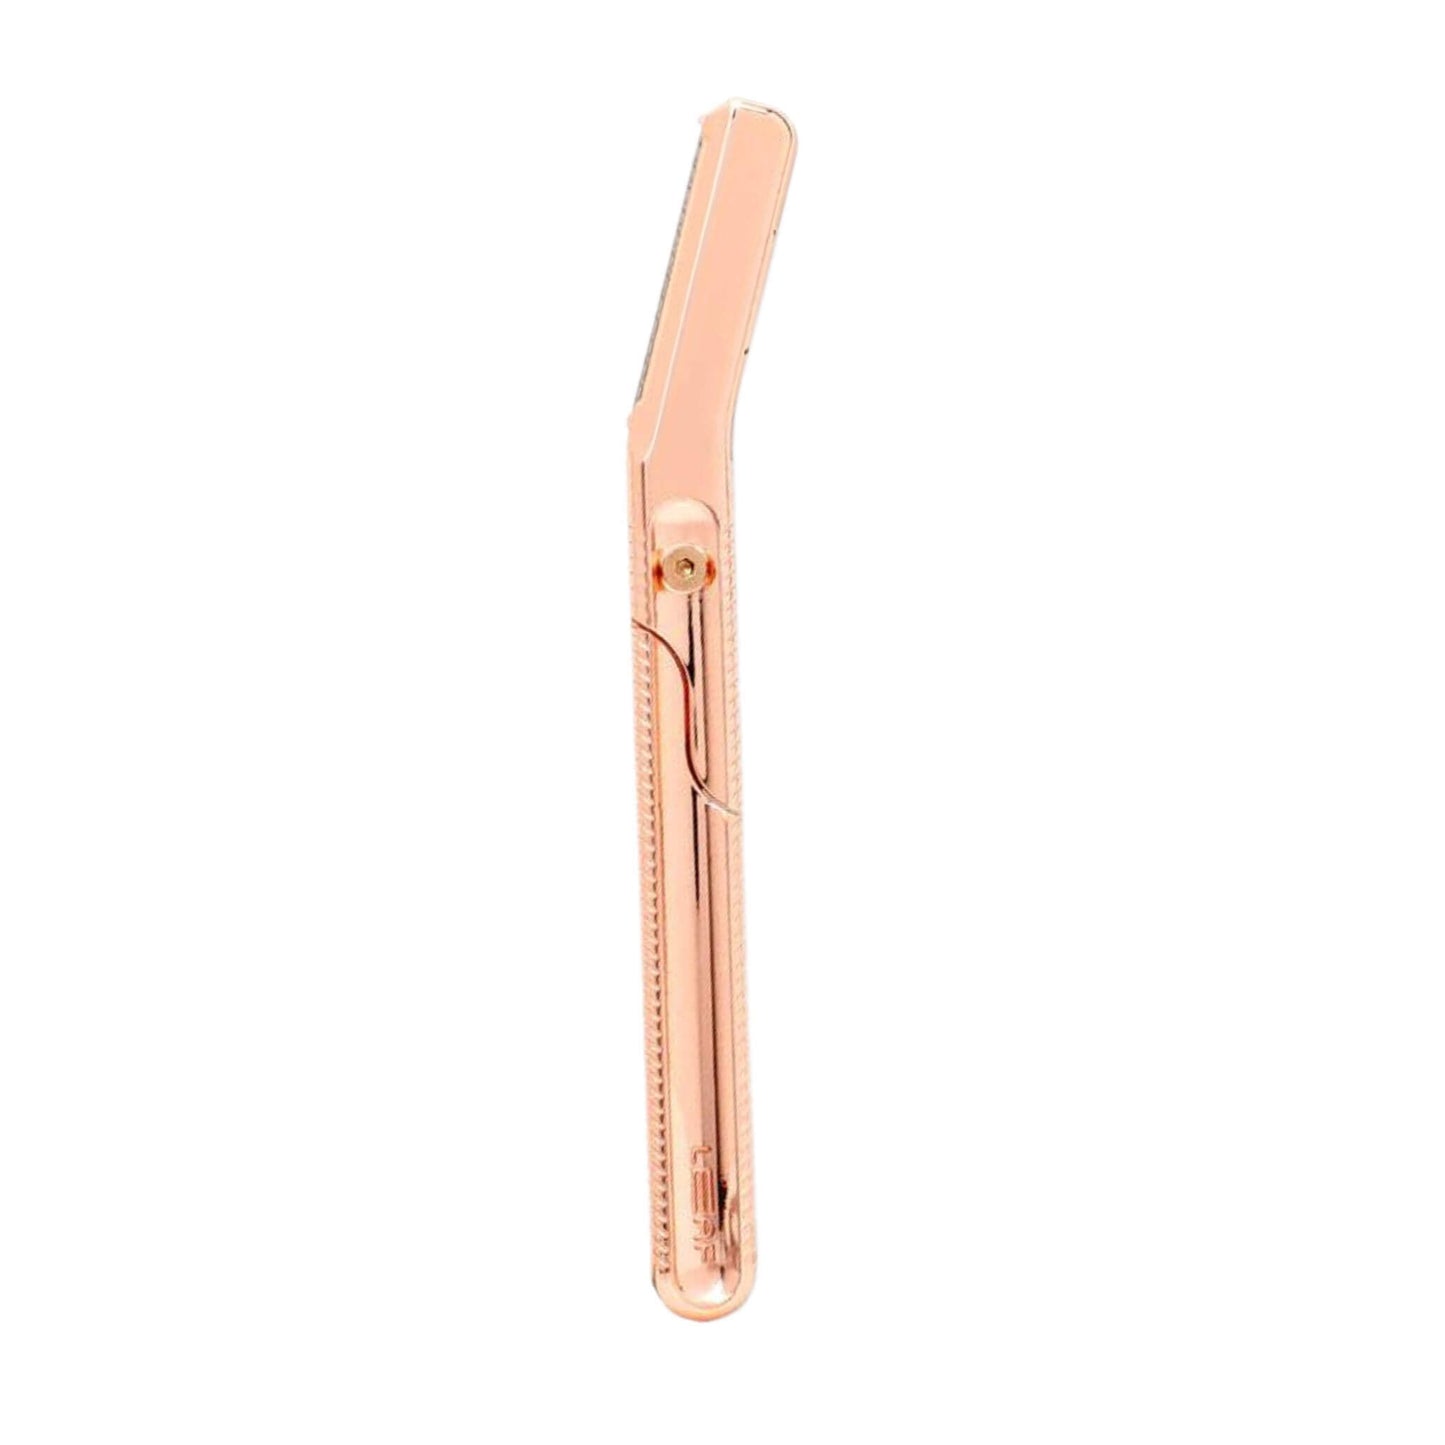 leaf dermaplaner in colour rose gold ideal for removing peach fuzz and deal skin cells